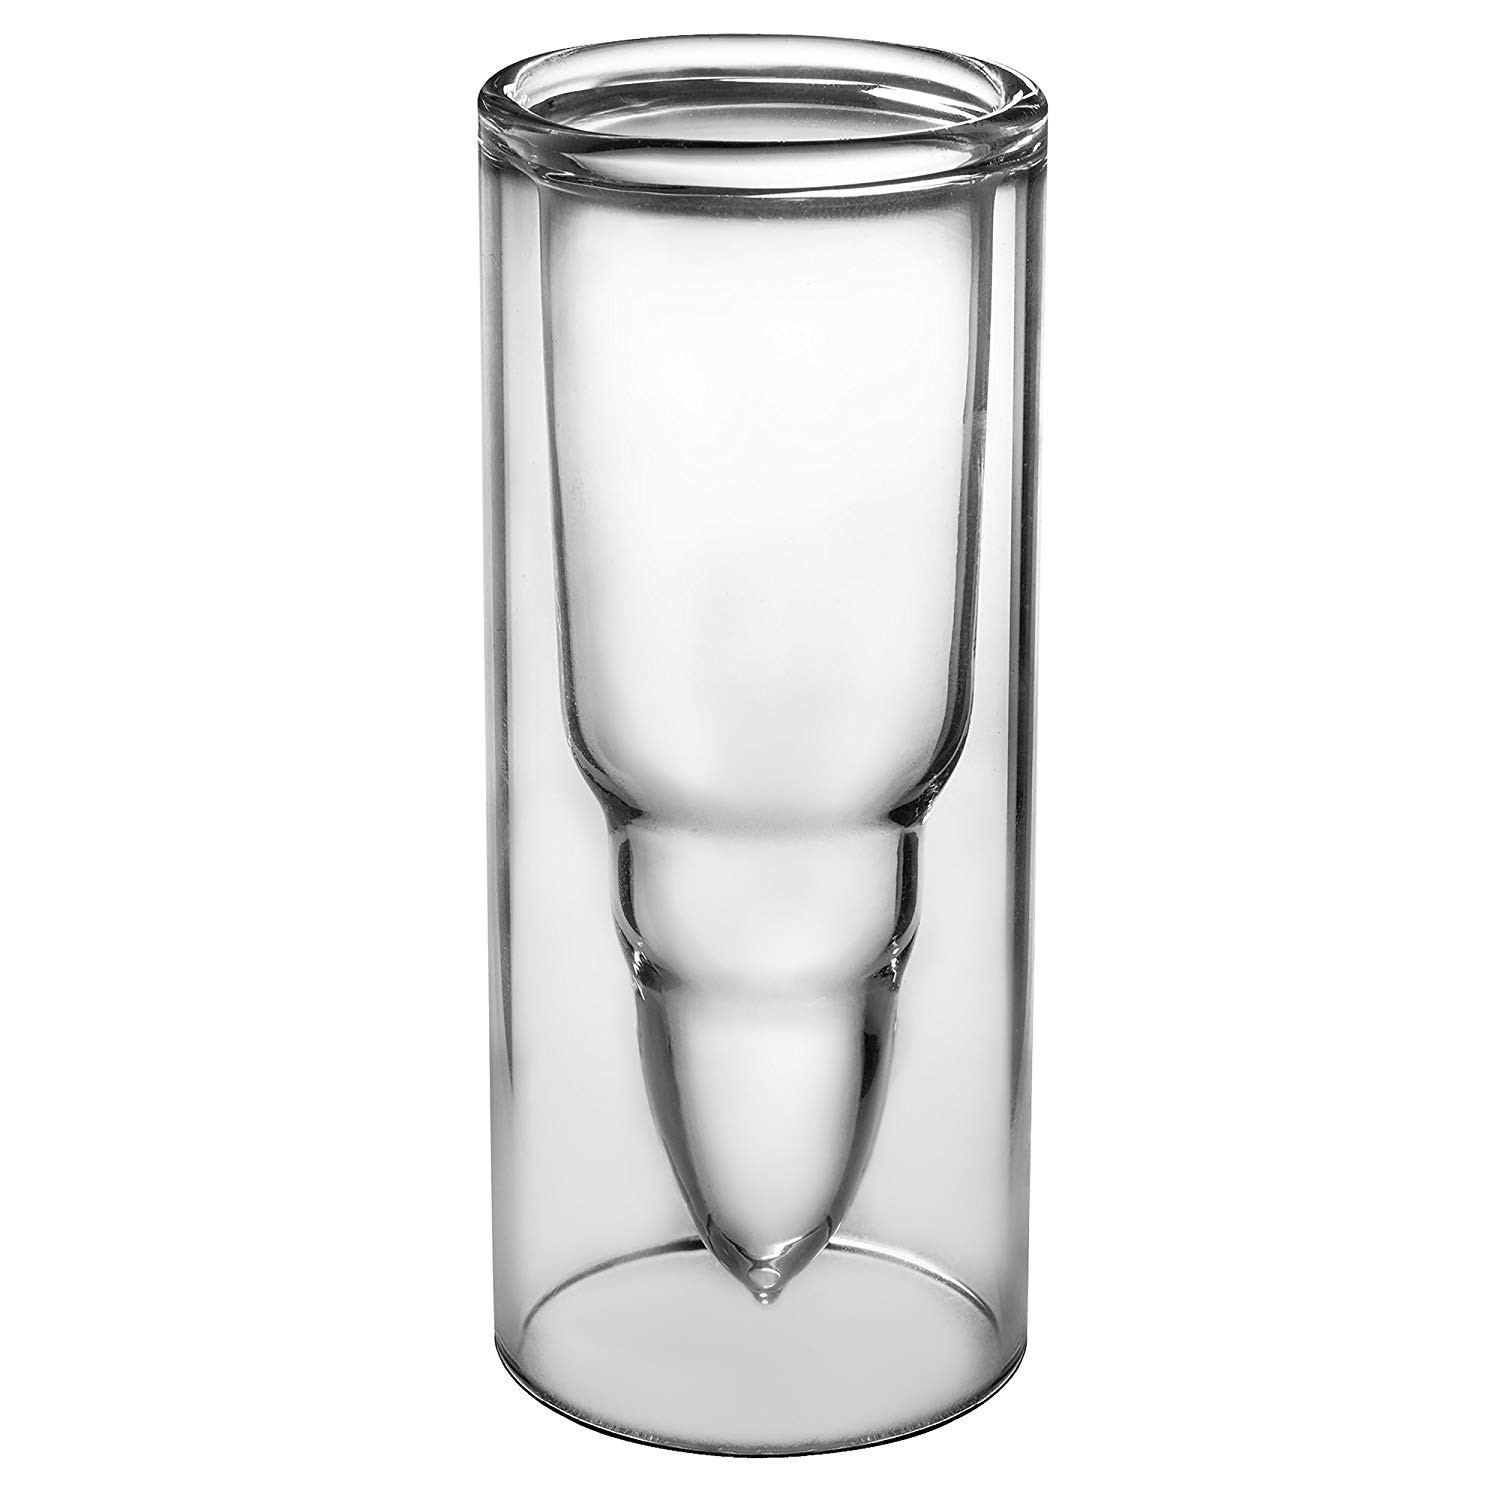 18 Recommended Thin Rectangle Glass Vase 2024 free download thin rectangle glass vase of amazon com 50 caliber bullet shaped shot glasses 4 pack durable for amazon com 50 caliber bullet shaped shot glasses 4 pack durable dual layered 1 5 oz novelty g